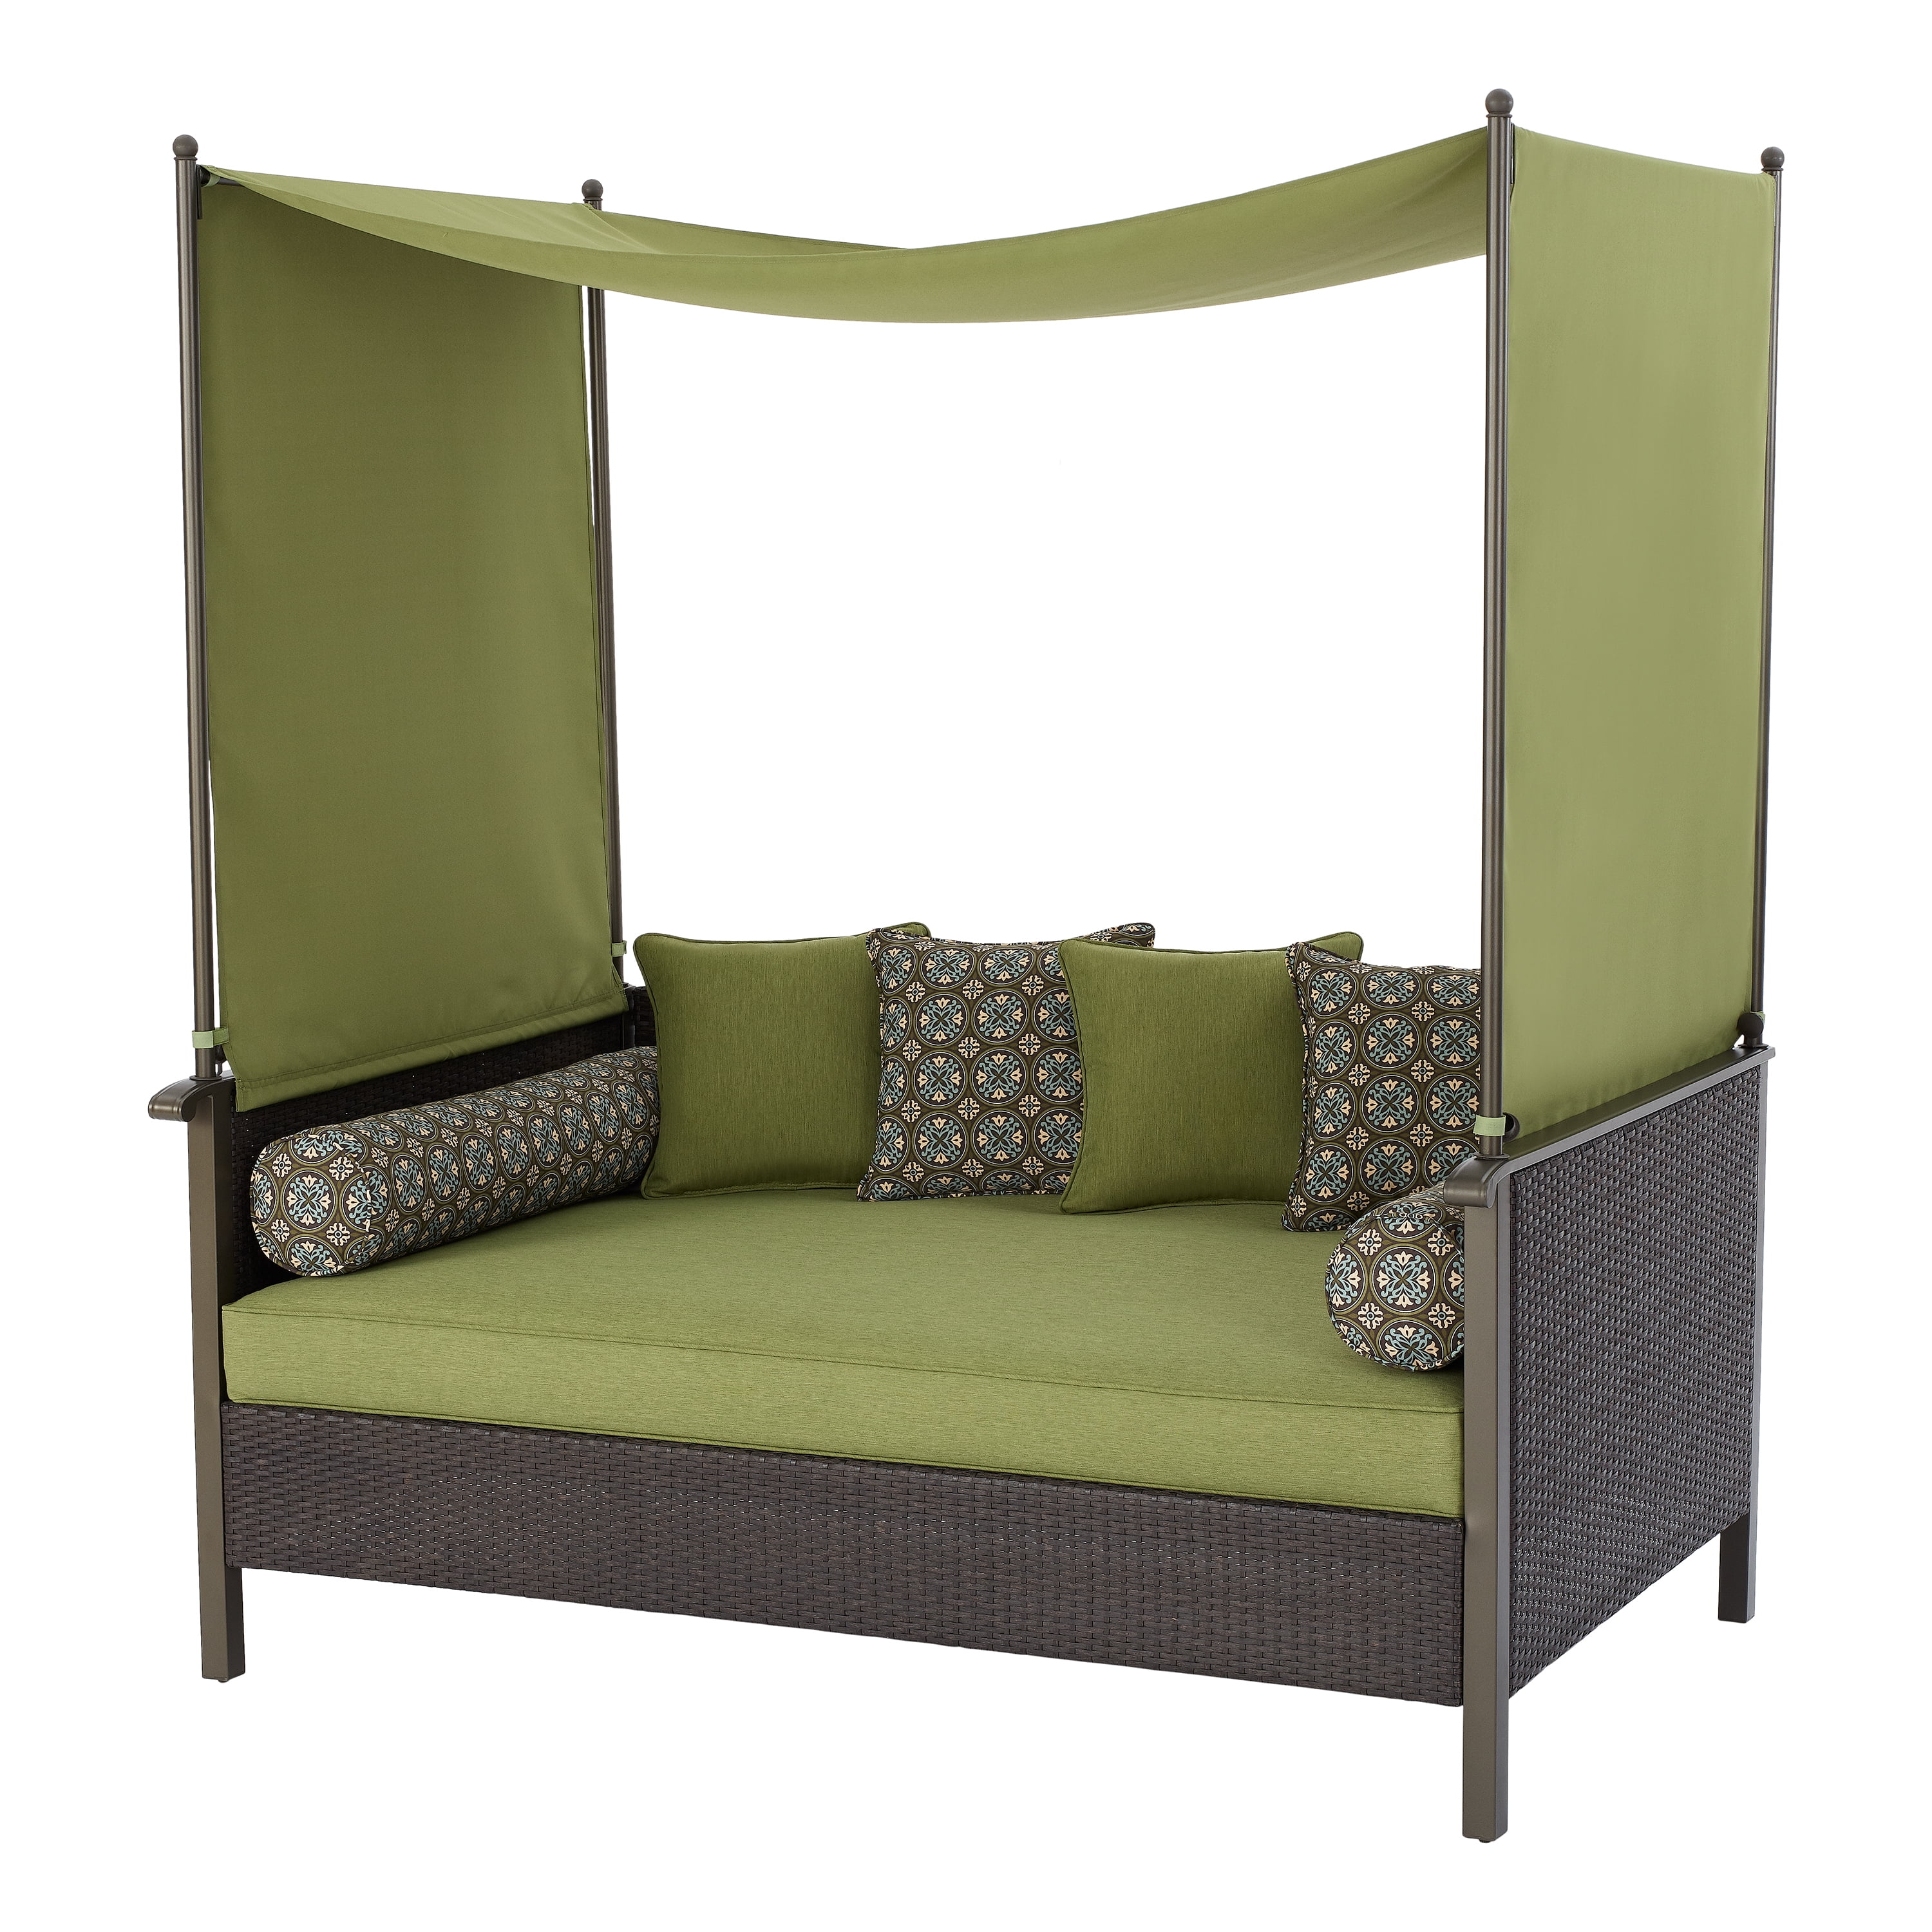 Gardens Providence Outdoor Daybed, Outdoor Daybed Canopy Replacement